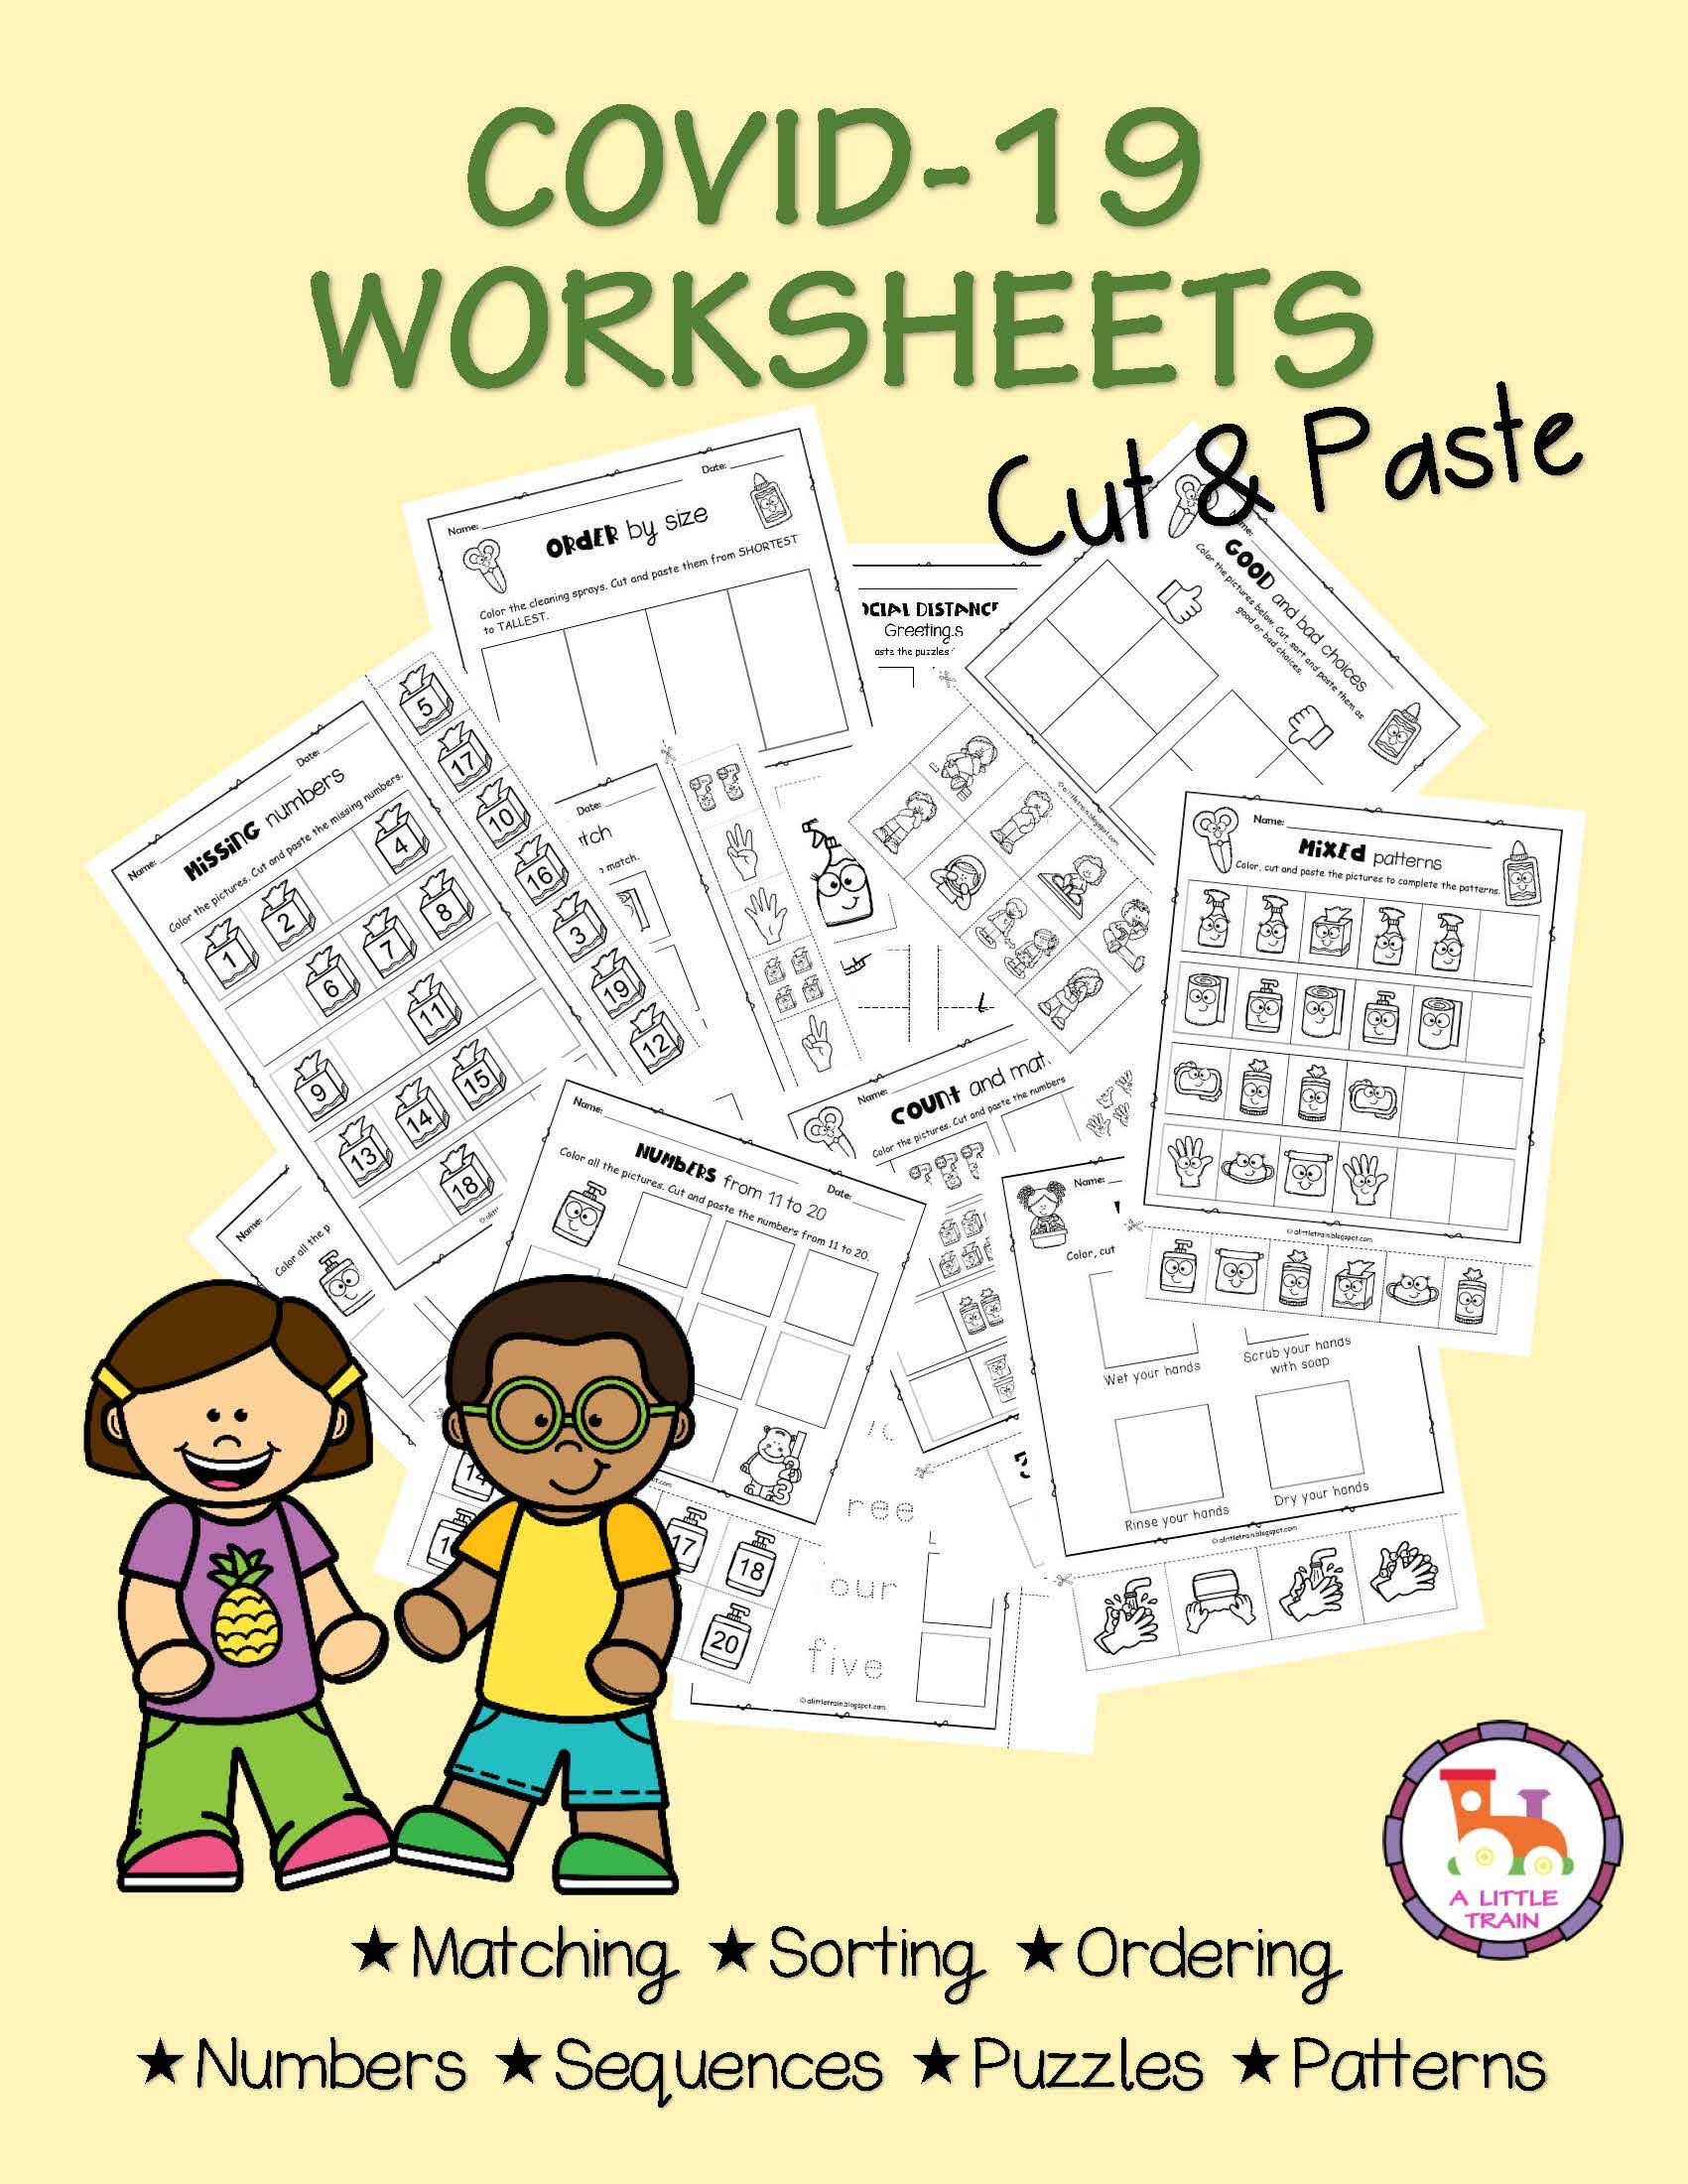 a-little-train-covid-19-worksheets-to-color-cut-and-paste-numbers-from-1-to-100